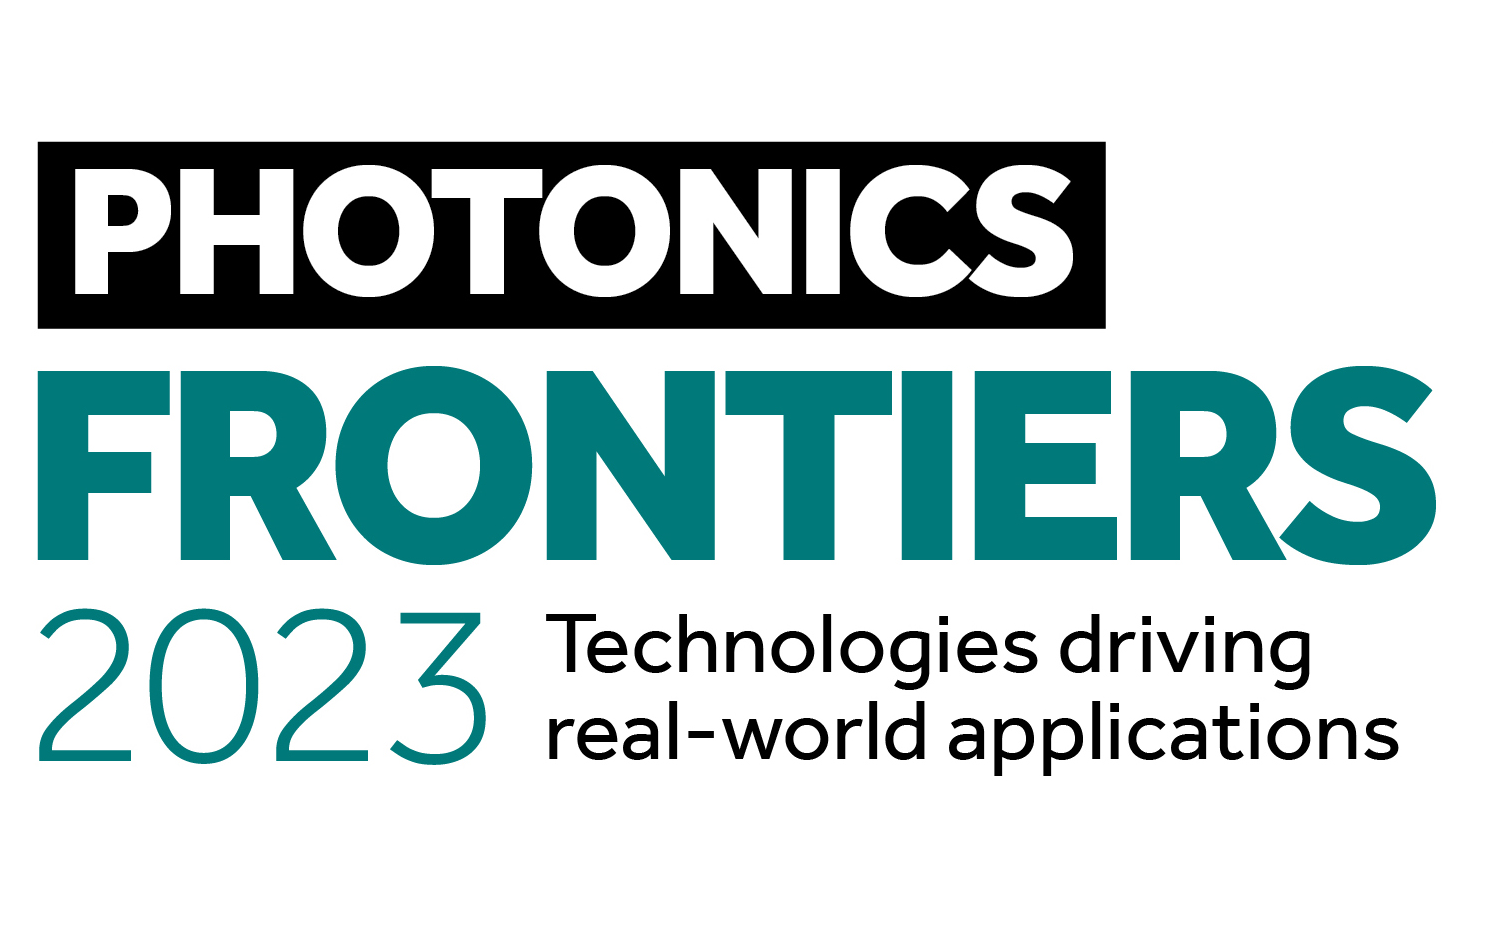 Photonics Frontiers 2023 Technologies driving real-world applications (logo)